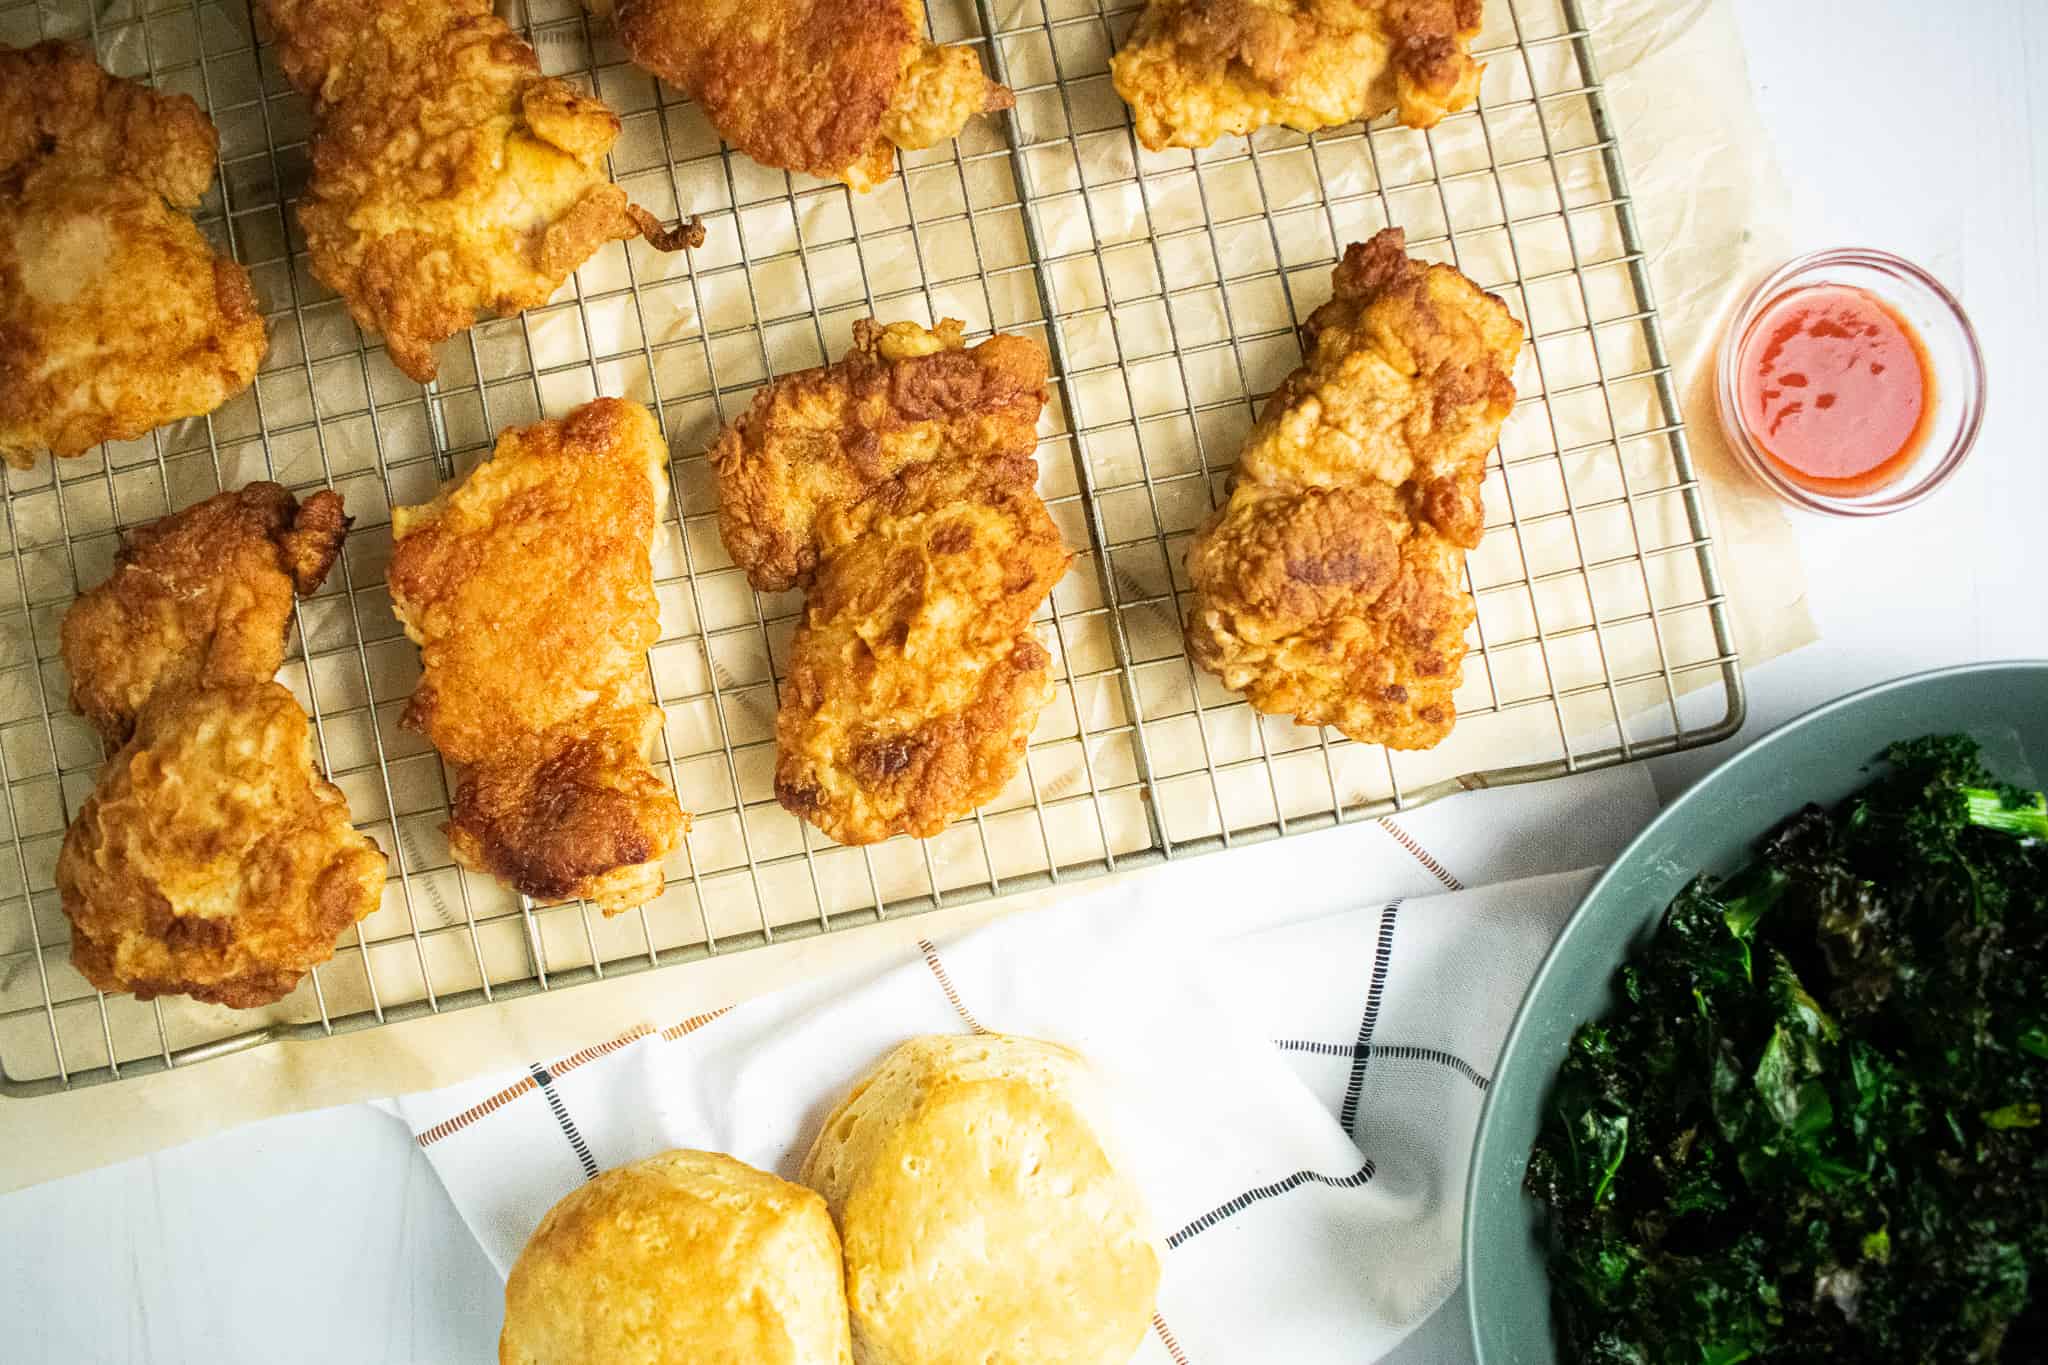 fried chicken on a rack